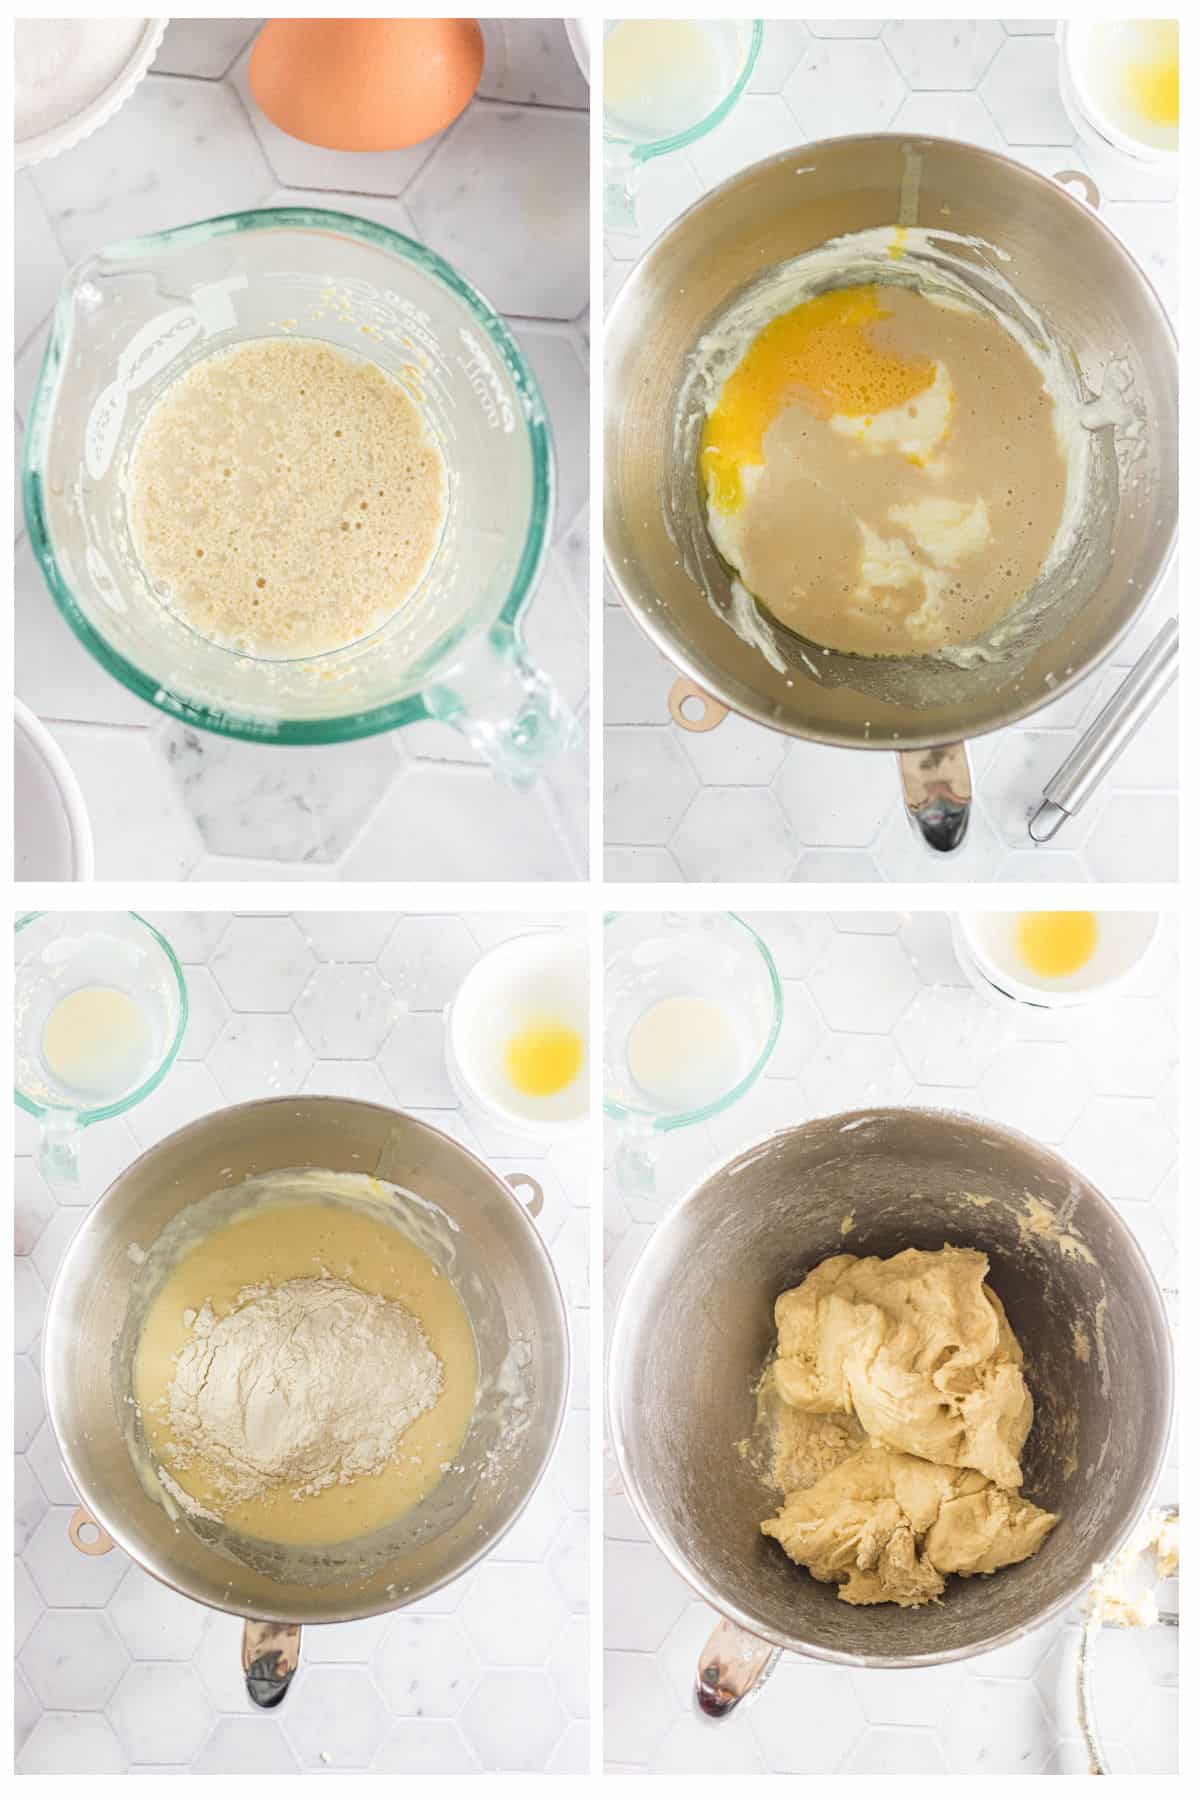 Step by step images showing how to make the dough for cinnamon rolls.